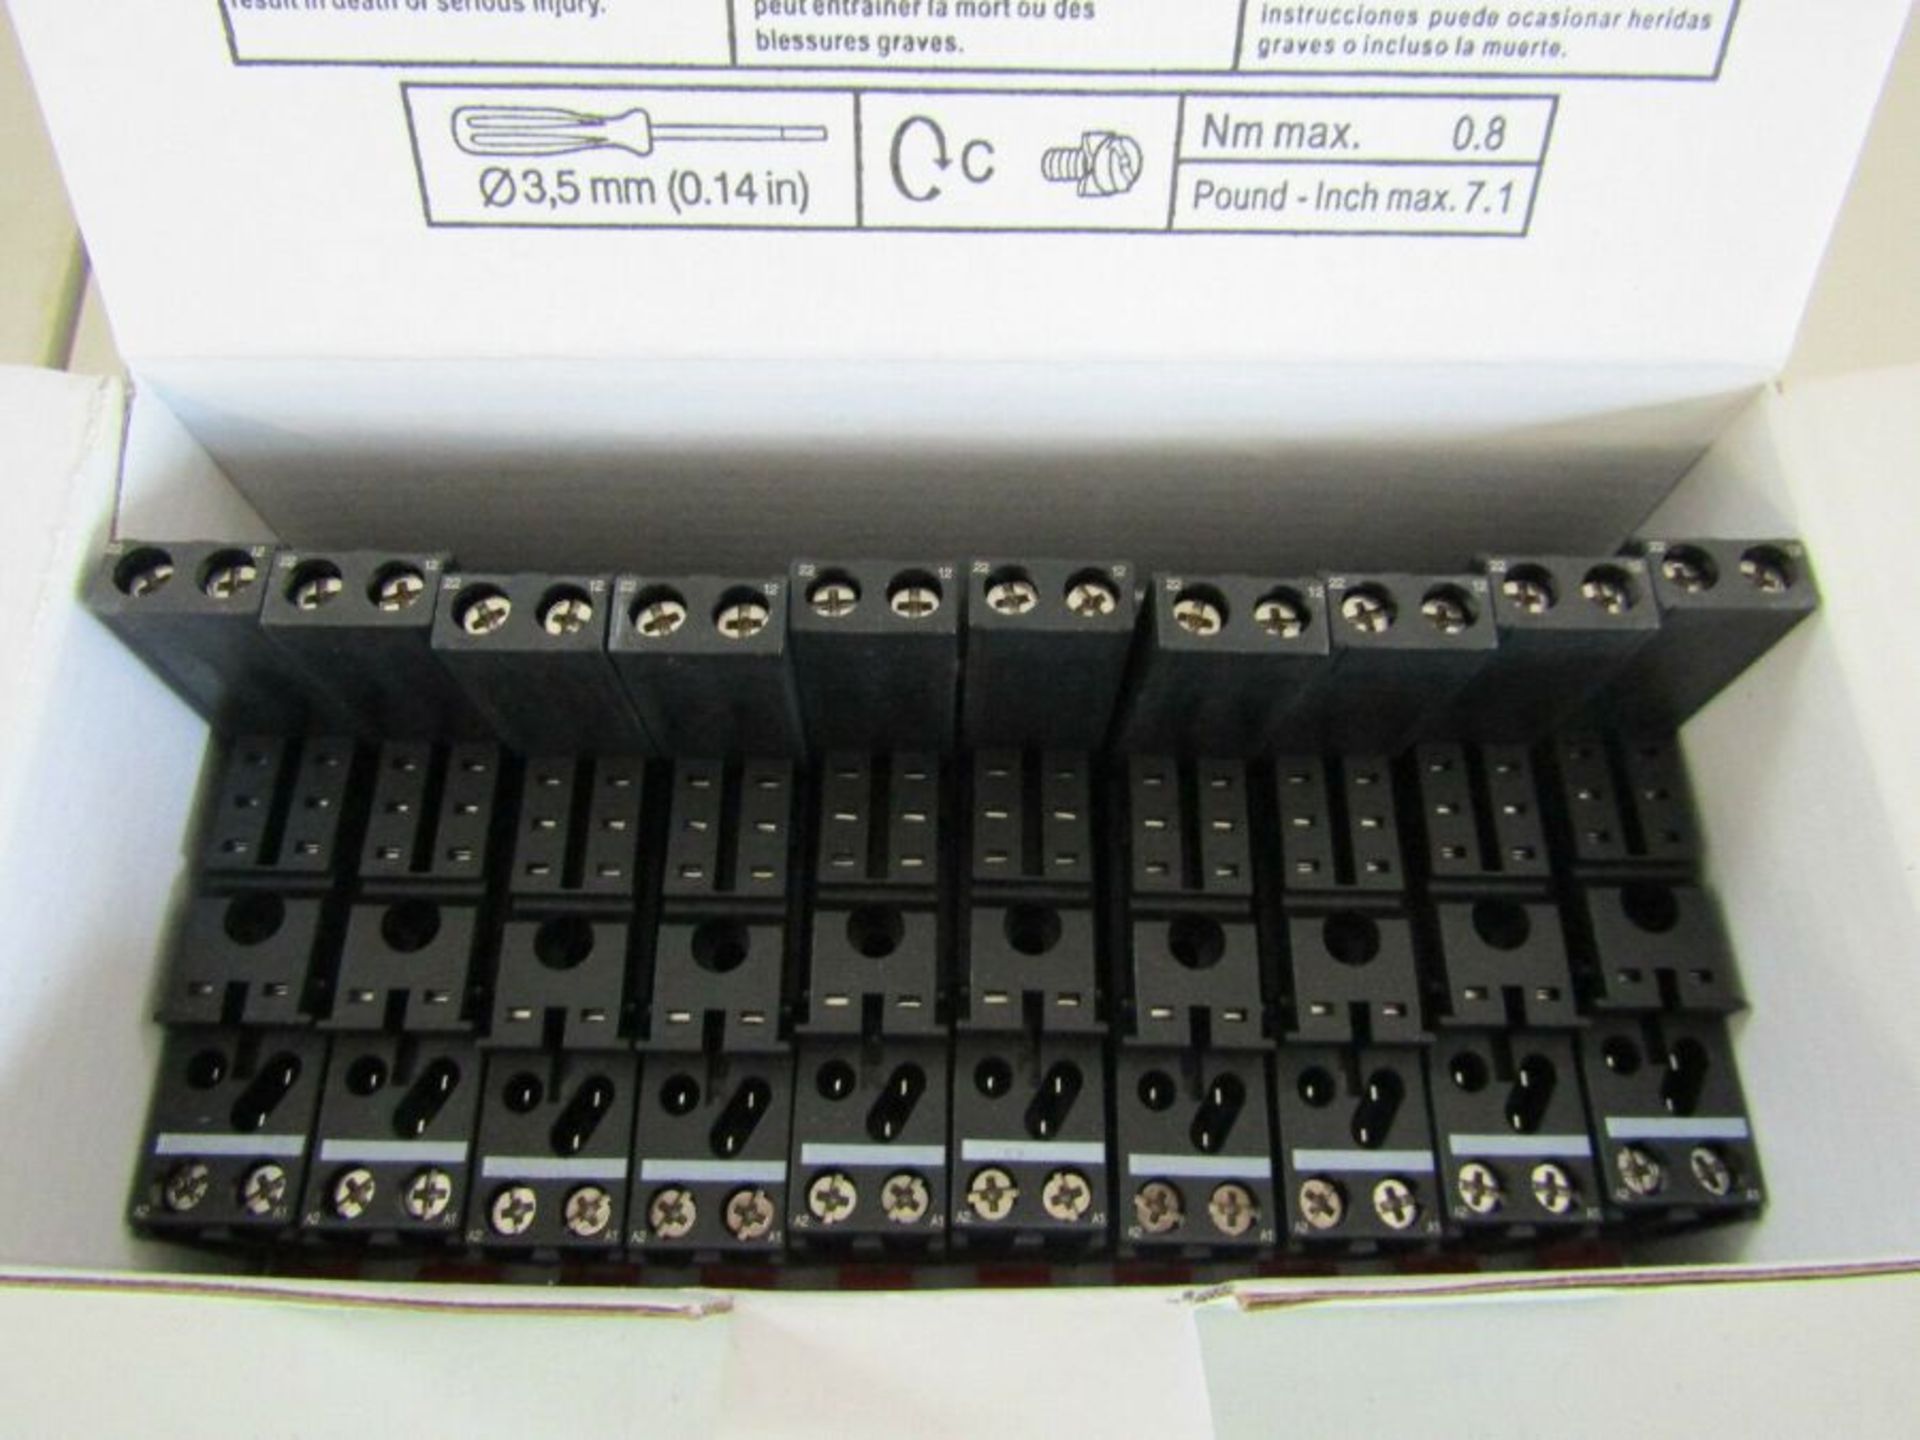 200 x SCHNEIDER RSZE1S48M Relay Socket for RSB Series - (20 boxes of 10) S2 - 8497667 - Image 4 of 6